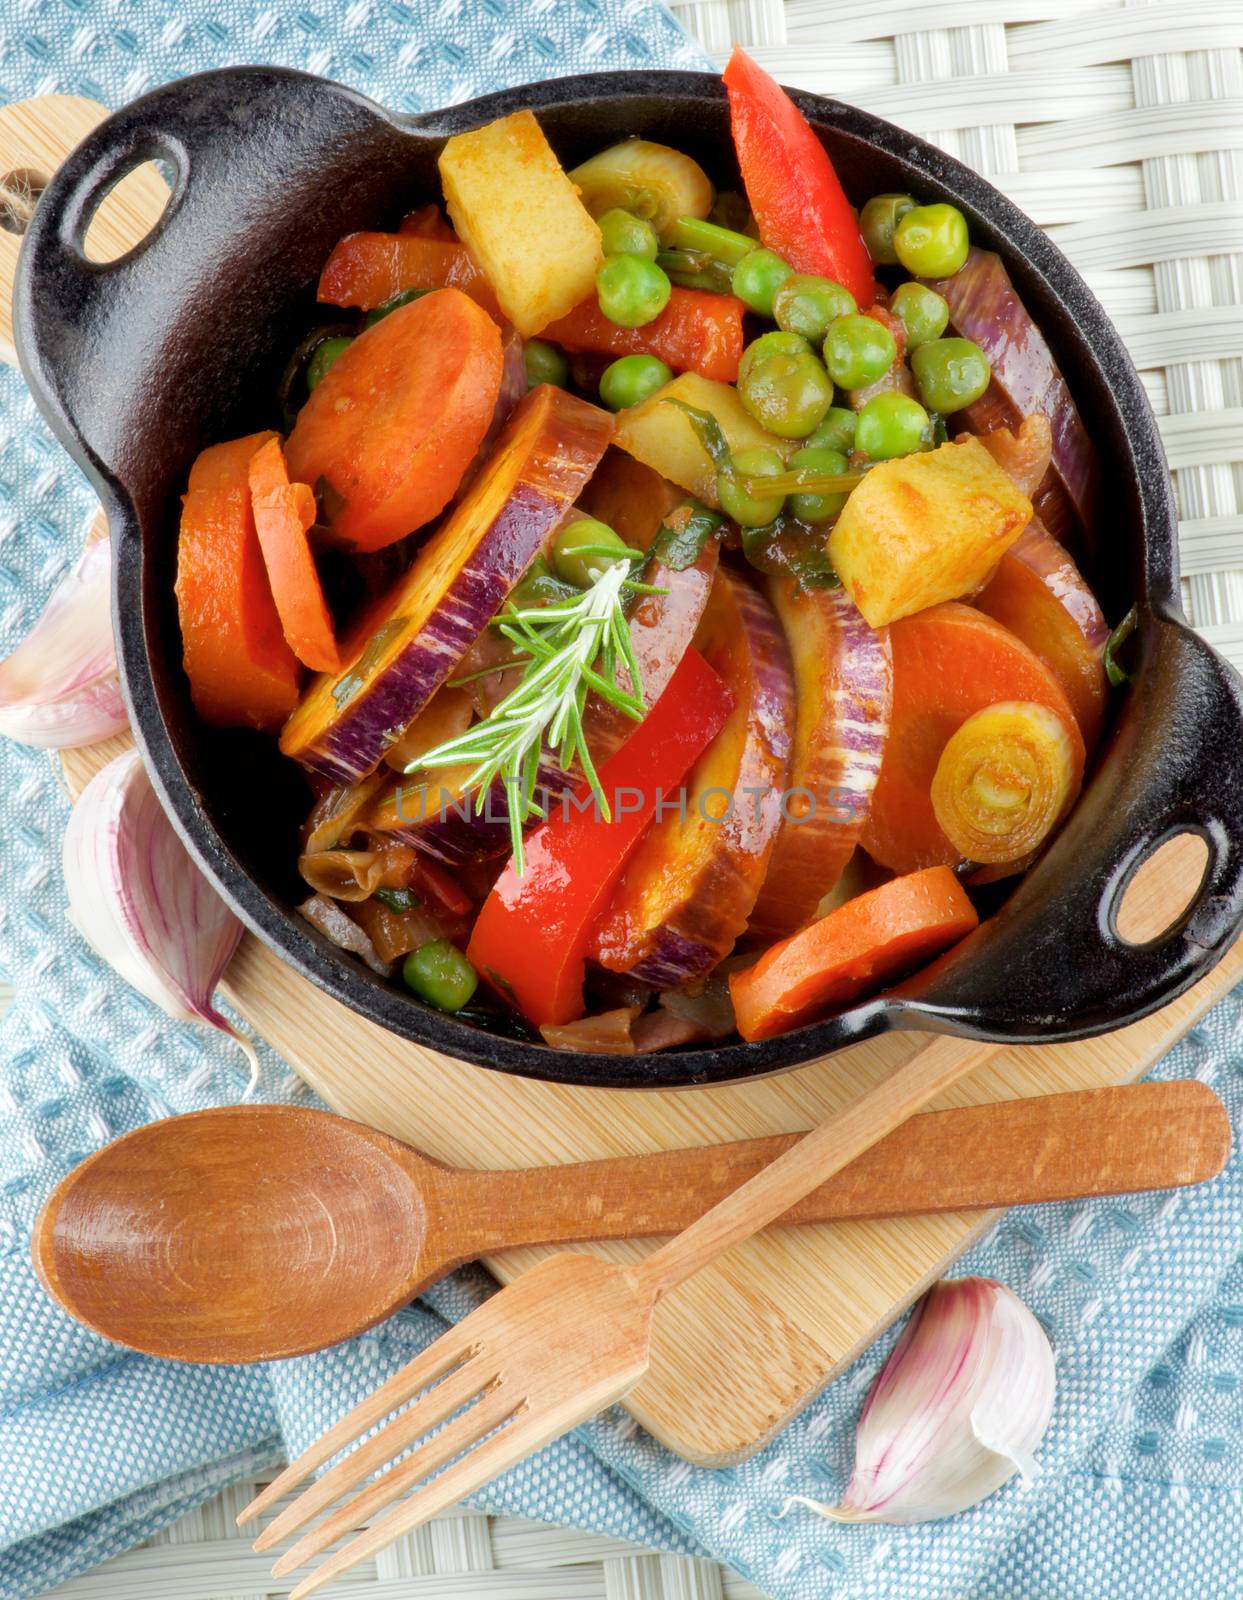 Delicious Homemade Colorful Vegetables Ragout with Eggplant, Carrots, Potatoes, Leek, Red Bell Pepper and Green Pea in Black Iron Stewpot with Wooden Spoon and Fork closeup on Blue Napkin